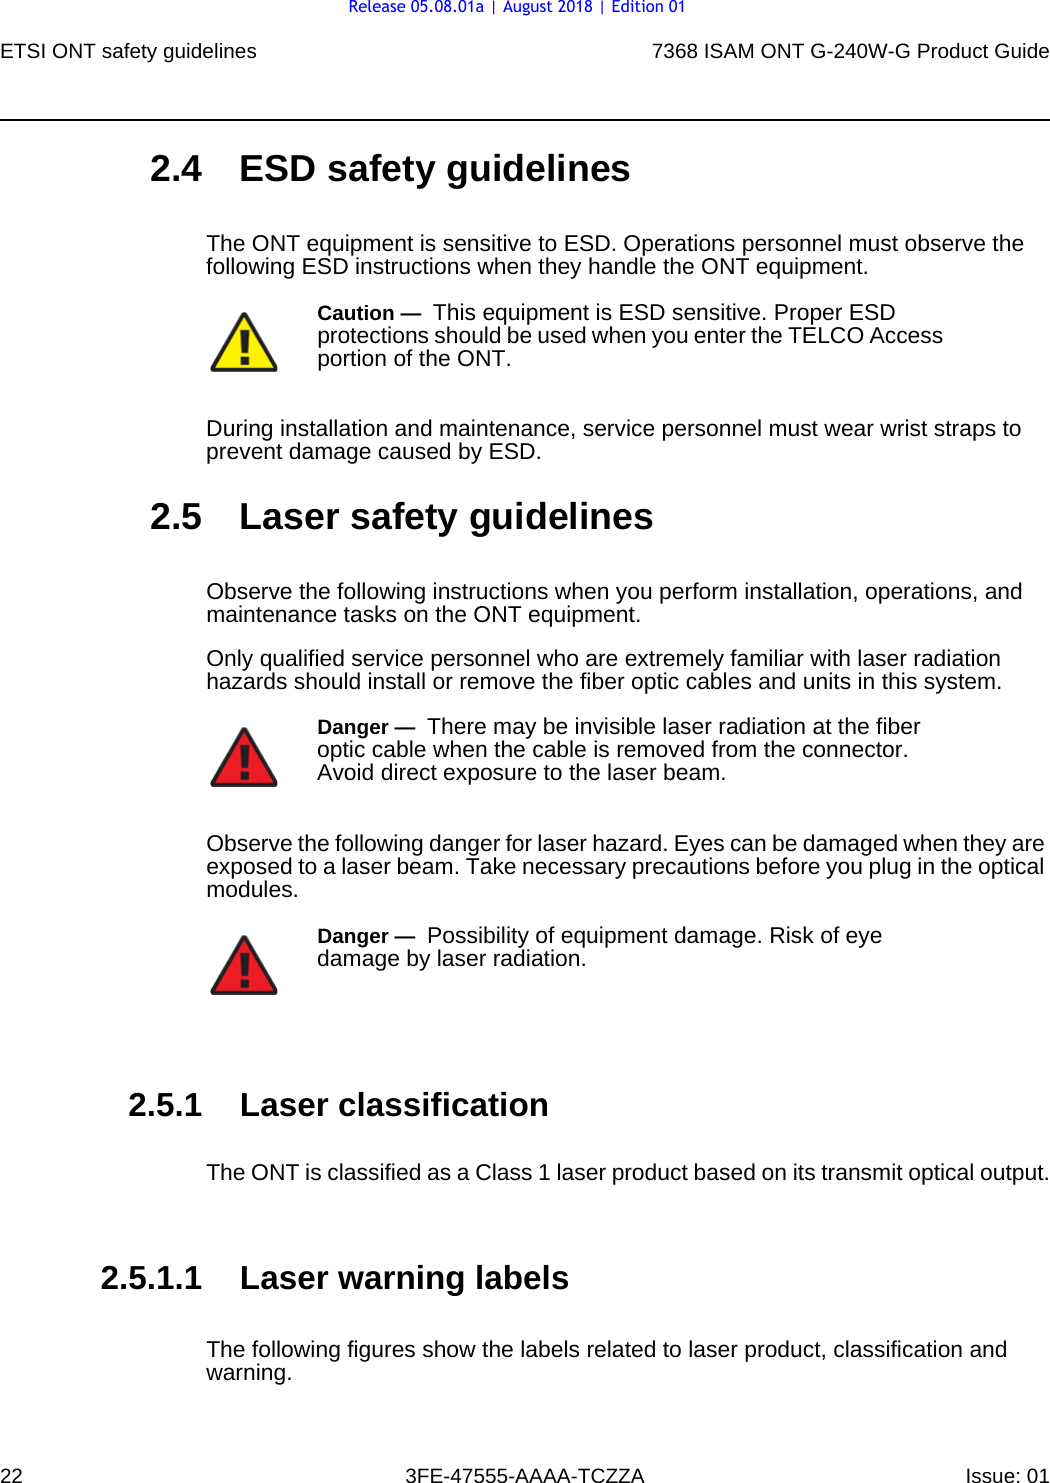 ETSI ONT safety guidelines227368 ISAM ONT G-240W-G Product Guide3FE-47555-AAAA-TCZZA Issue: 01 2.4 ESD safety guidelinesThe ONT equipment is sensitive to ESD. Operations personnel must observe the following ESD instructions when they handle the ONT equipment. During installation and maintenance, service personnel must wear wrist straps to prevent damage caused by ESD.2.5 Laser safety guidelinesObserve the following instructions when you perform installation, operations, and maintenance tasks on the ONT equipment.Only qualified service personnel who are extremely familiar with laser radiation hazards should install or remove the fiber optic cables and units in this system.Observe the following danger for laser hazard. Eyes can be damaged when they are exposed to a laser beam. Take necessary precautions before you plug in the optical modules.2.5.1 Laser classificationThe ONT is classified as a Class 1 laser product based on its transmit optical output.2.5.1.1 Laser warning labelsThe following figures show the labels related to laser product, classification and warning. Caution —  This equipment is ESD sensitive. Proper ESD protections should be used when you enter the TELCO Access portion of the ONT.Danger —  There may be invisible laser radiation at the fiber optic cable when the cable is removed from the connector. Avoid direct exposure to the laser beam.Danger —  Possibility of equipment damage. Risk of eye damage by laser radiation.Release 05.08.01a | August 2018 | Edition 01